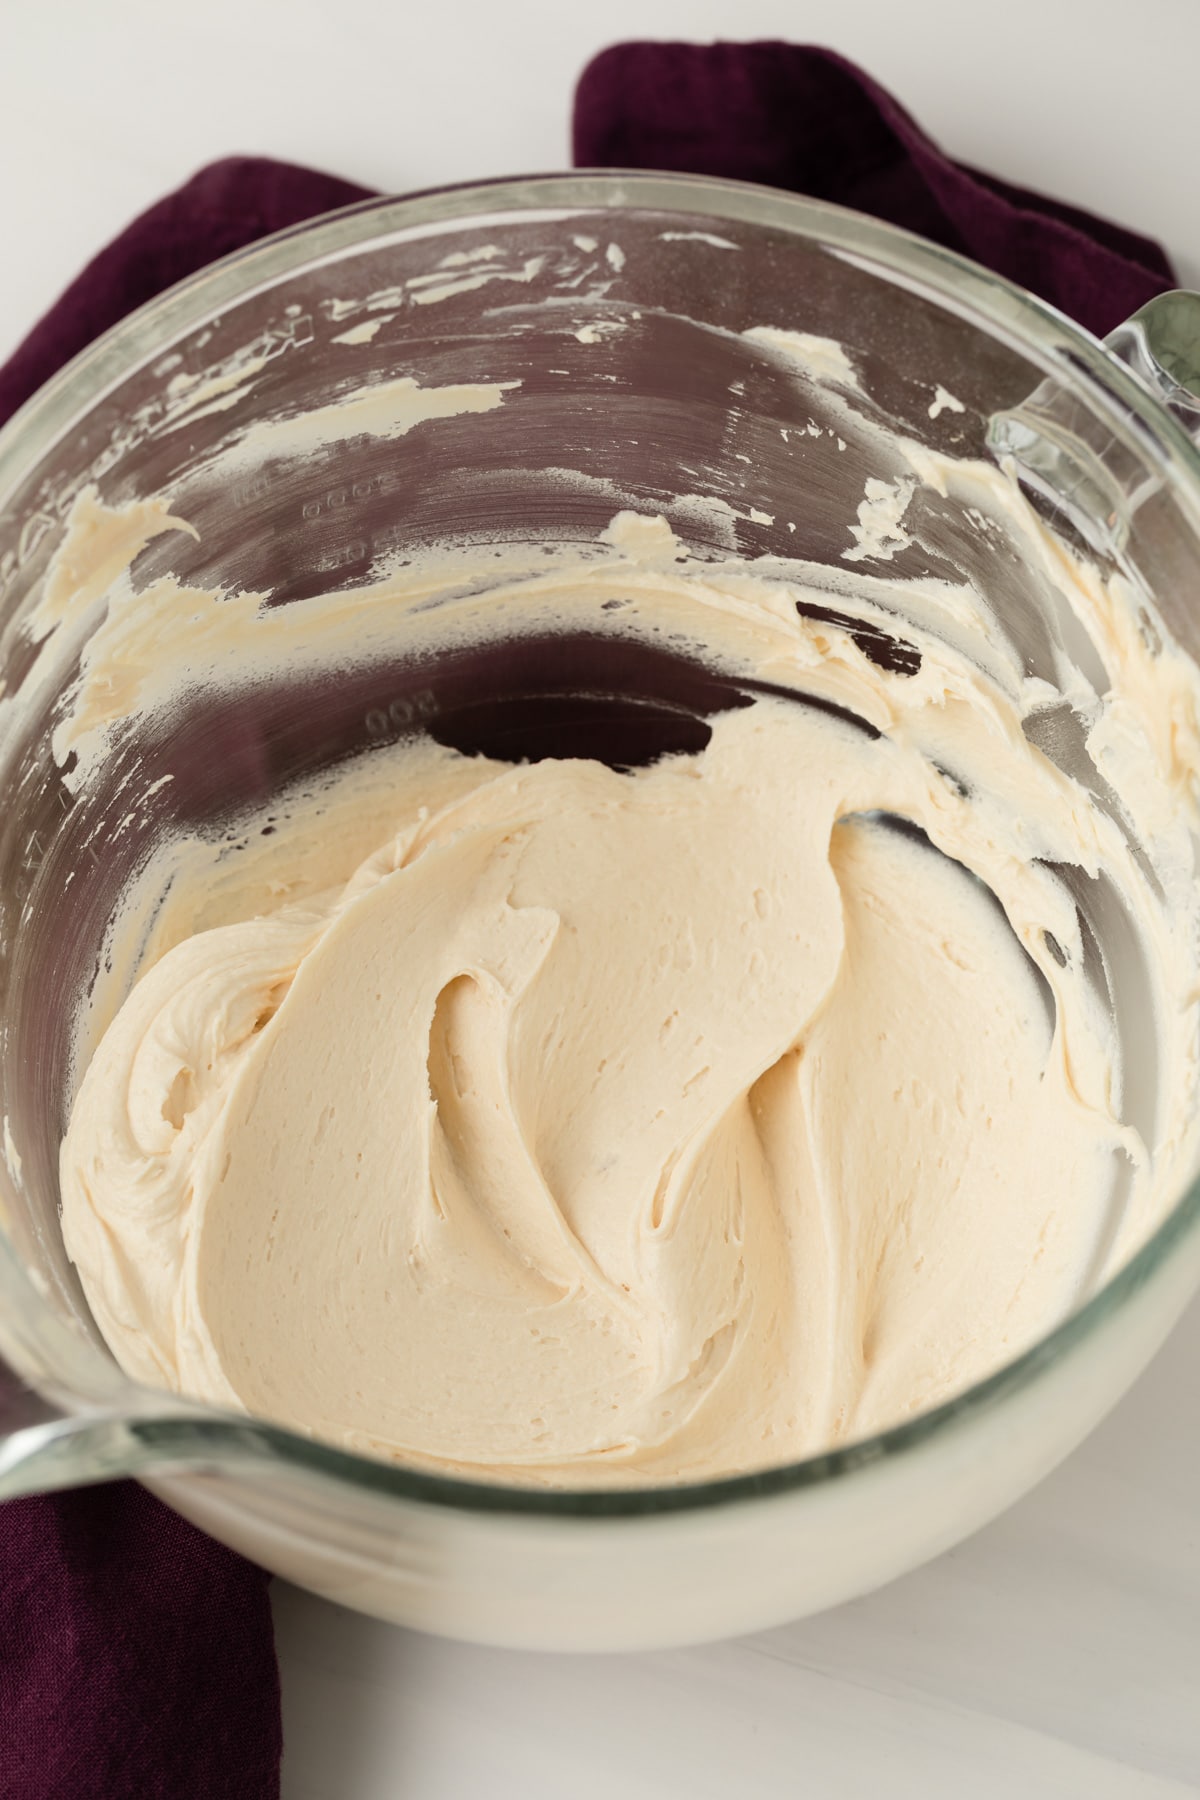 angled view of caramel frosting in large glass mixing bowl with purple cloth next to it